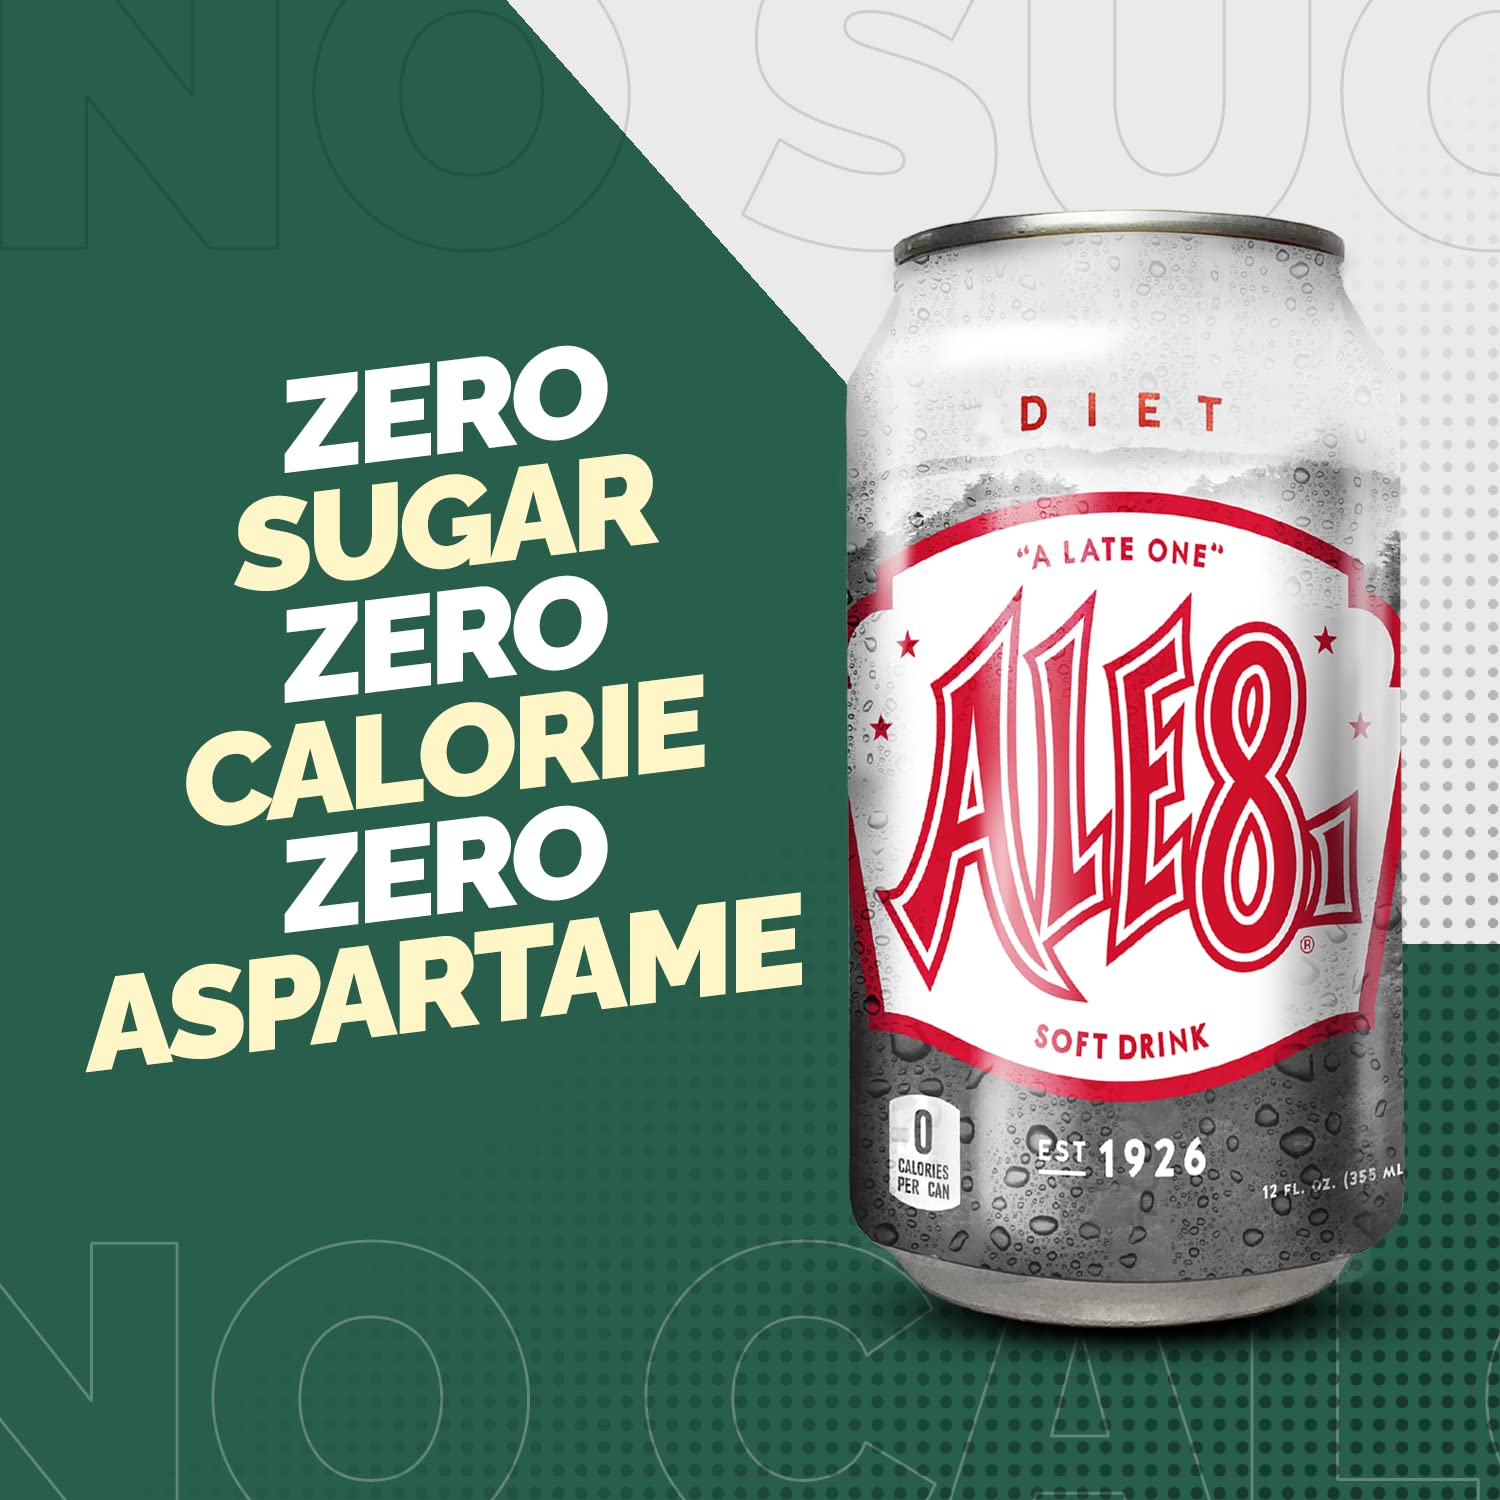 Ale 8 One Ginger Ale Soda with a Caffeine Kick & Hint of Citrus - Original Flavor - Zero Sugar - 12 Pack, Case of 12 Oz Cans - Sugar Free Ginger Soft Drink, Pack of 12 - image 2 of 6